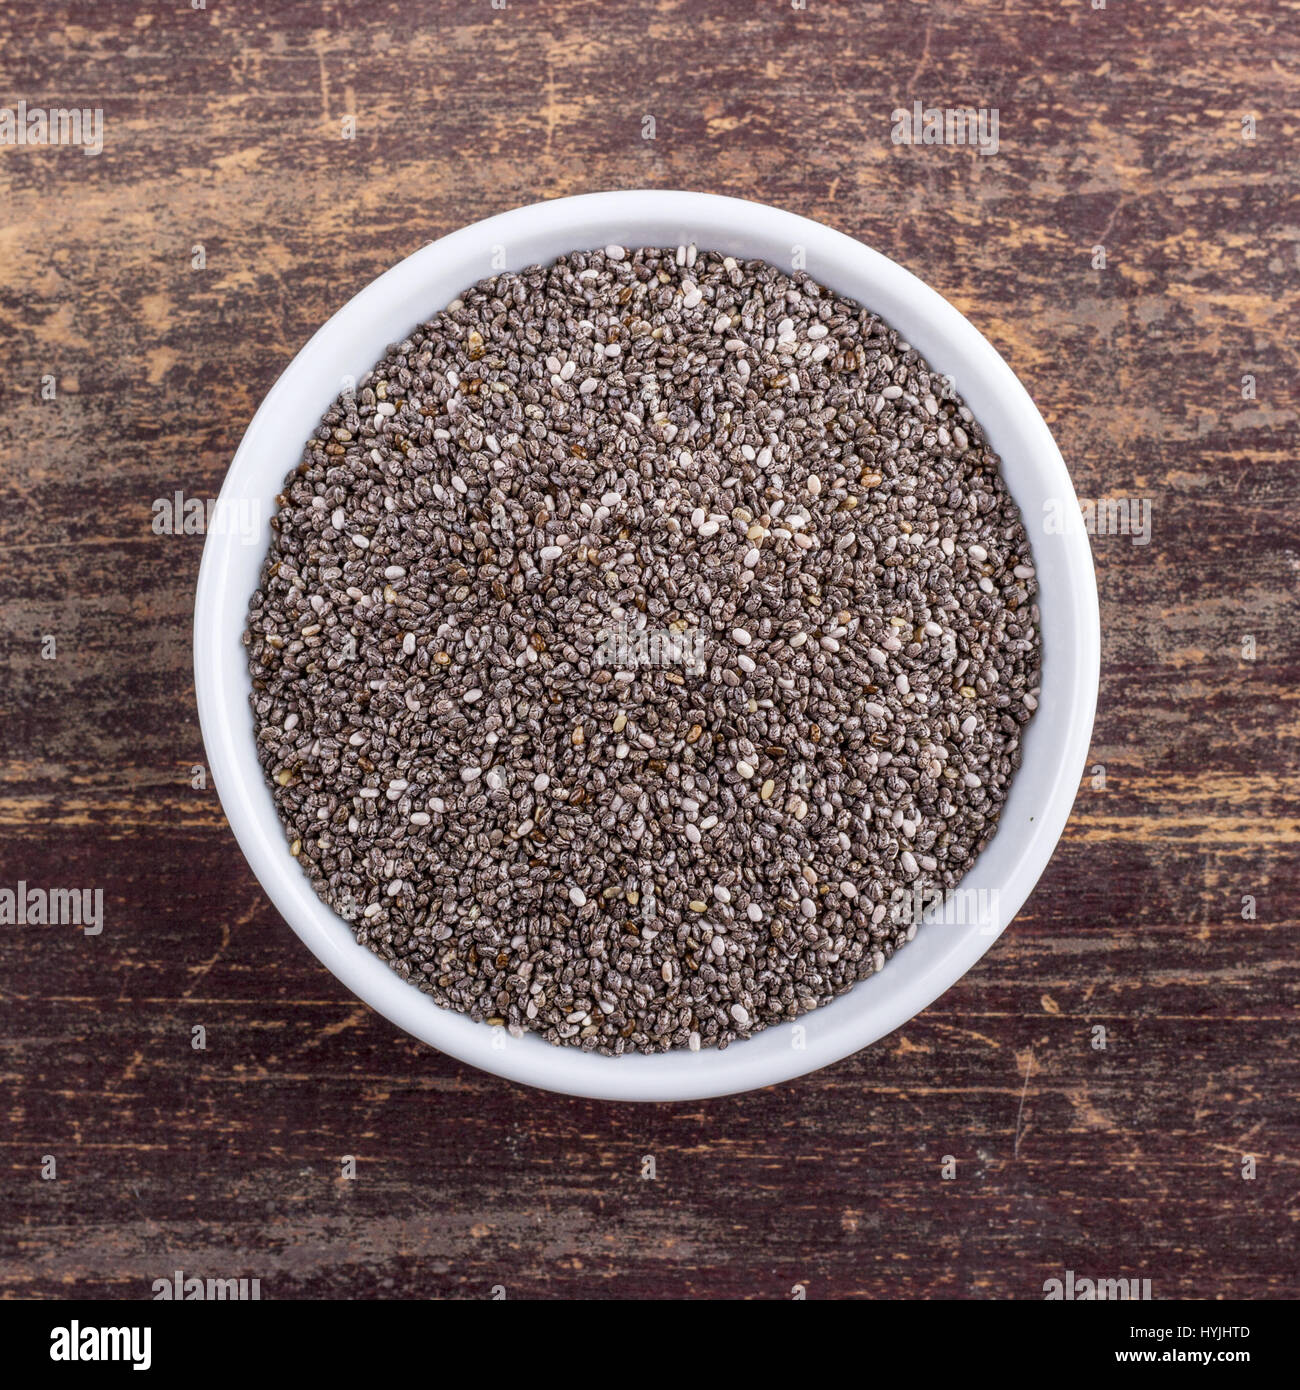 Porcelain dish with chia seeds Stock Photo